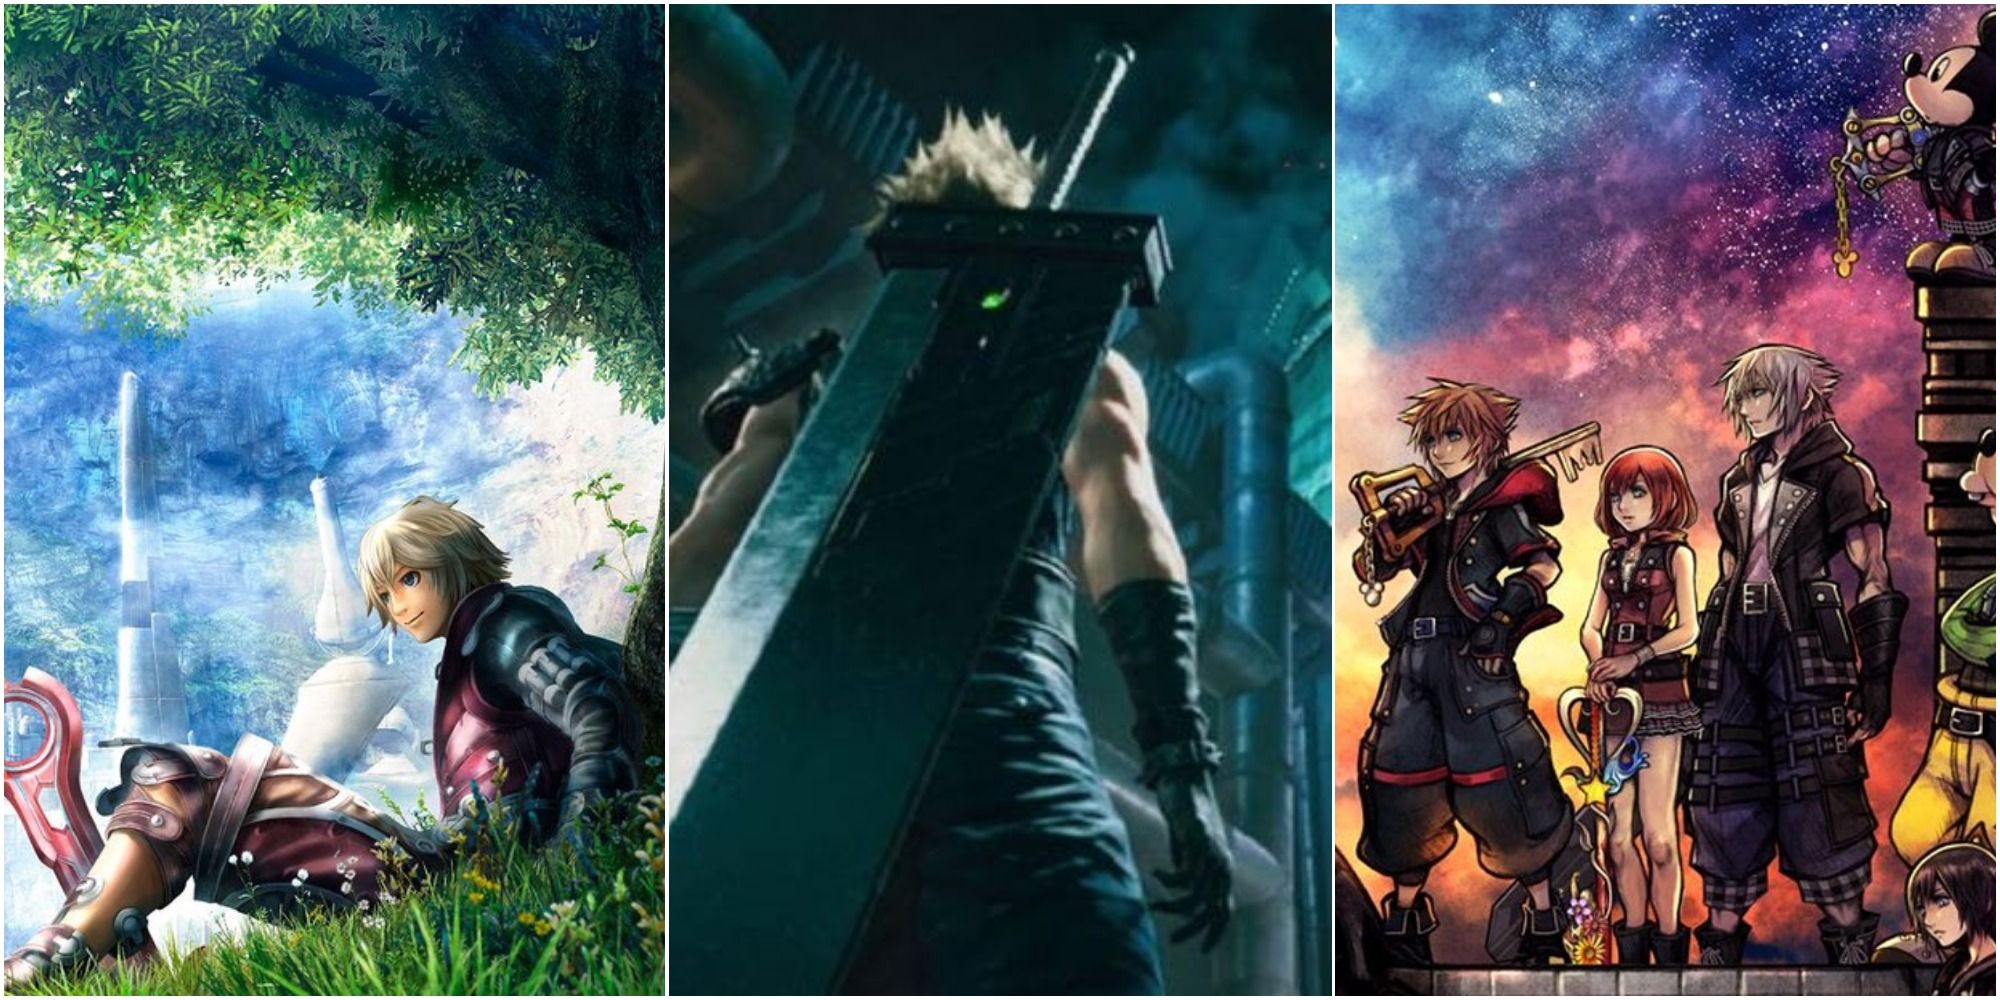 Split image screenshots of official art from Xenoblade Chronicles, Final Fantasy 7 Remake and Kingdom Hearts 3.